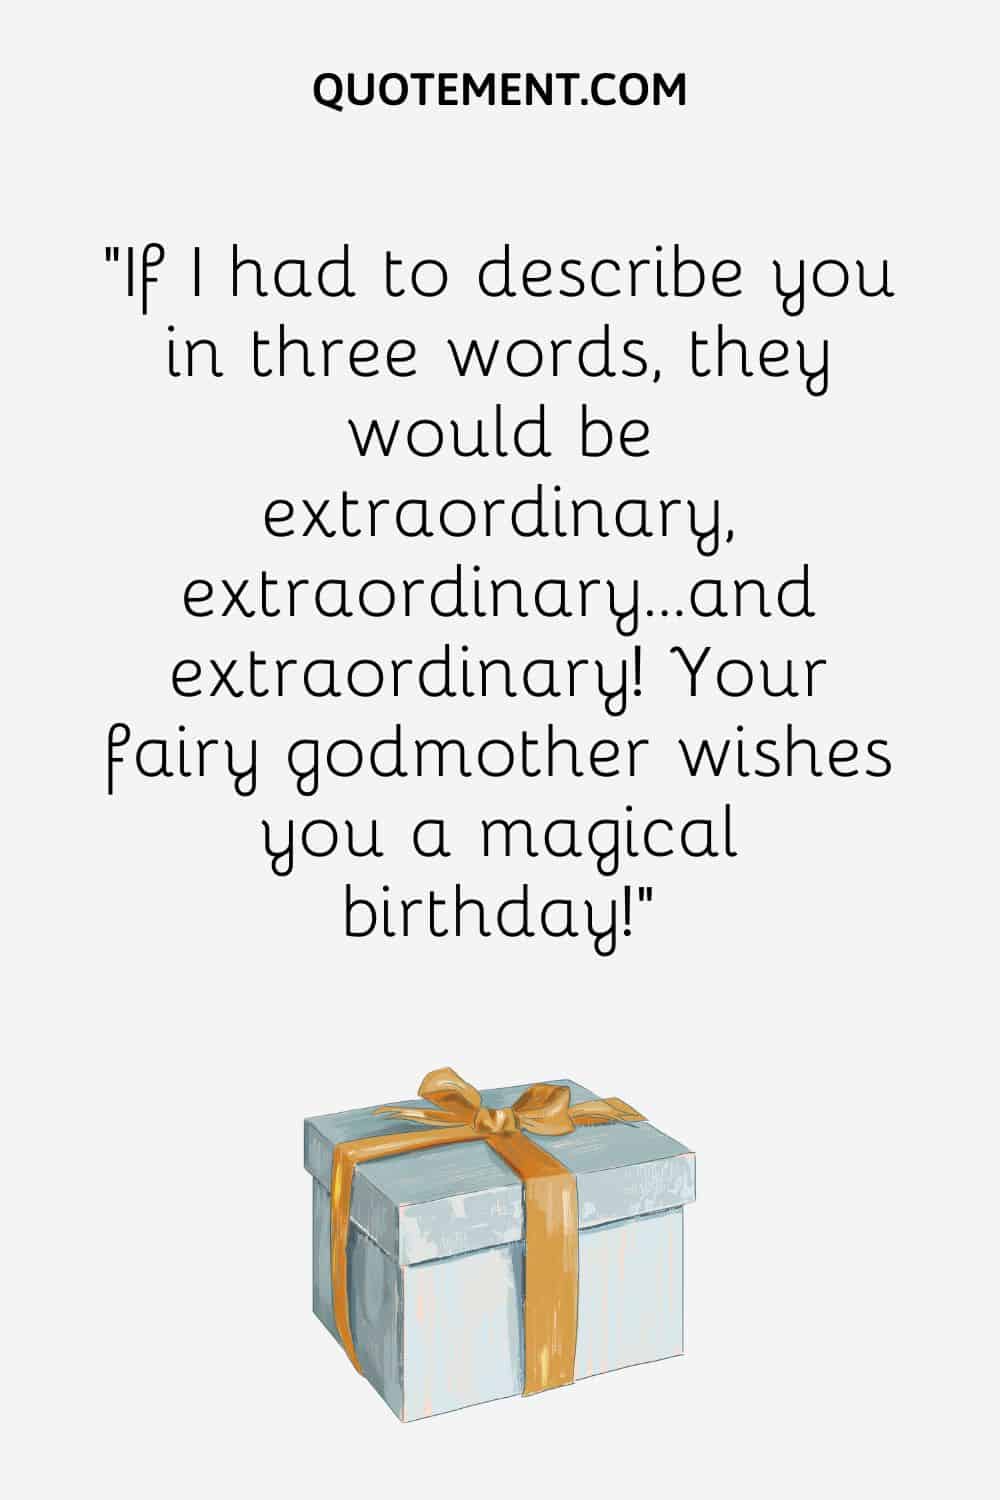 “If I had to describe you in three words, they would be extraordinary, extraordinary…and extraordinary! Your fairy godmother wishes you a magical birthday!”